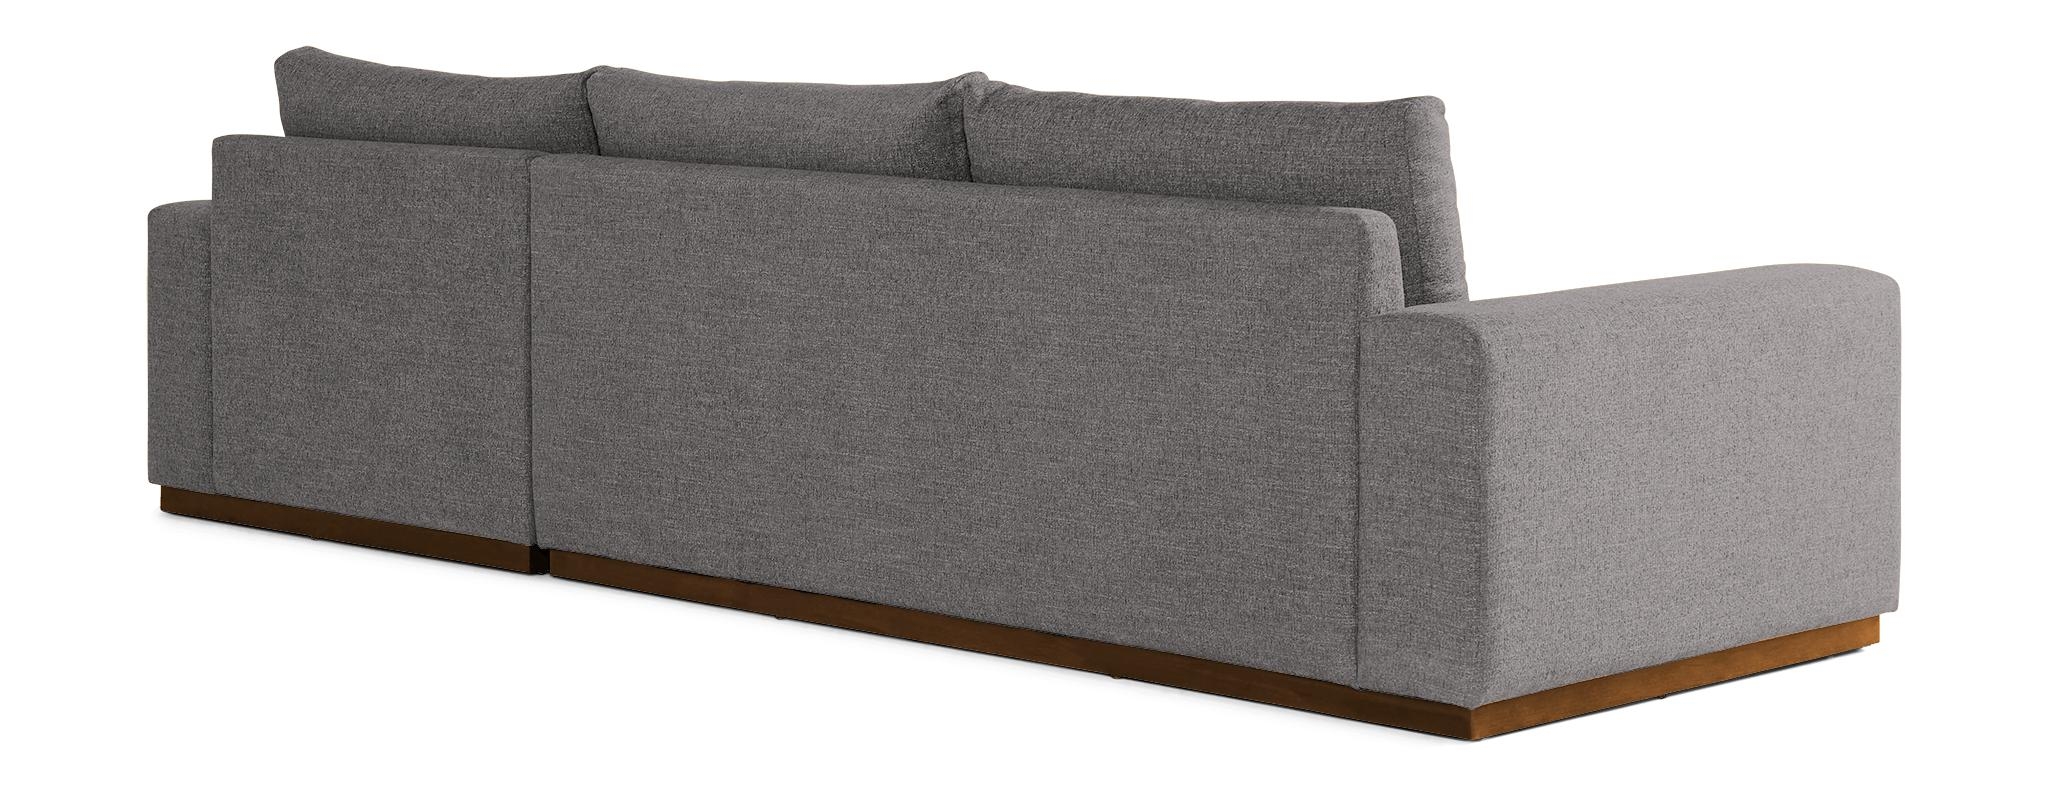 Gray Holt Mid Century Modern Sectional with Storage - Taylor Felt Grey - Mocha - Right - Image 4